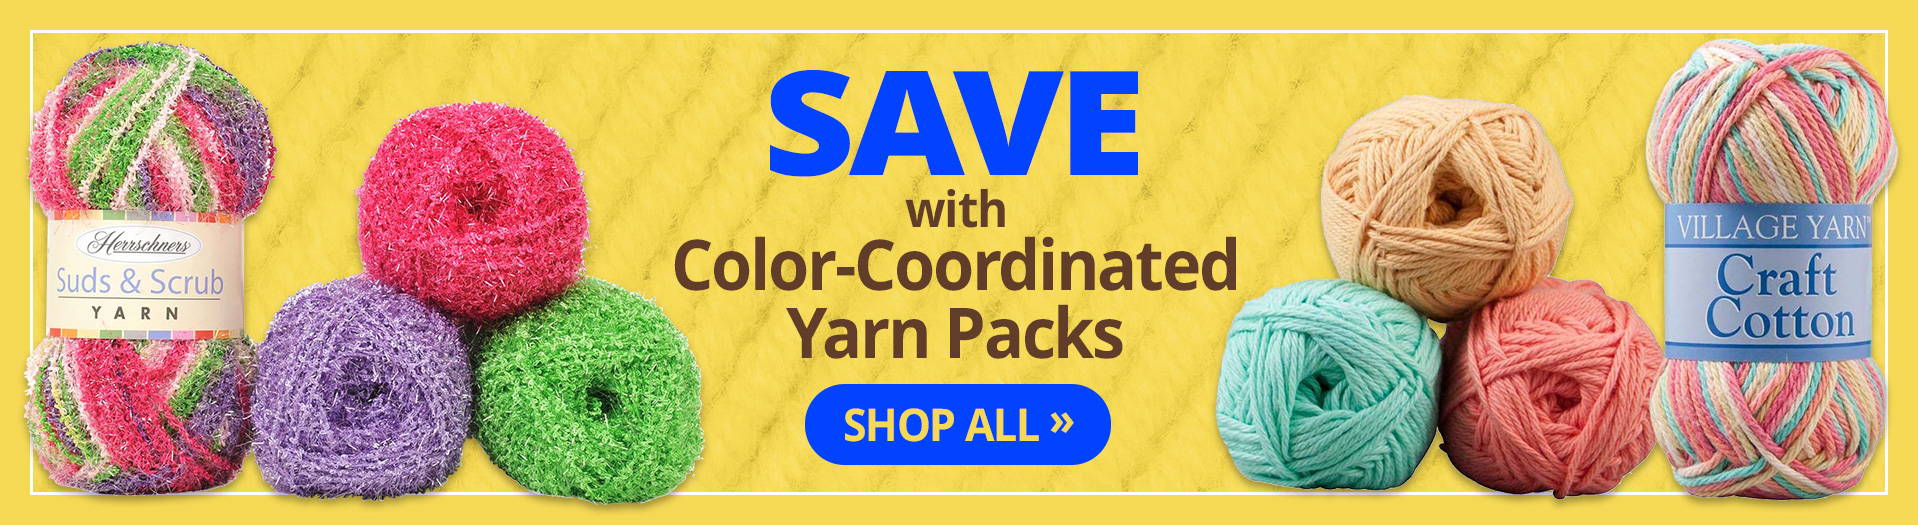 Save with color-coordinated yarn packs 